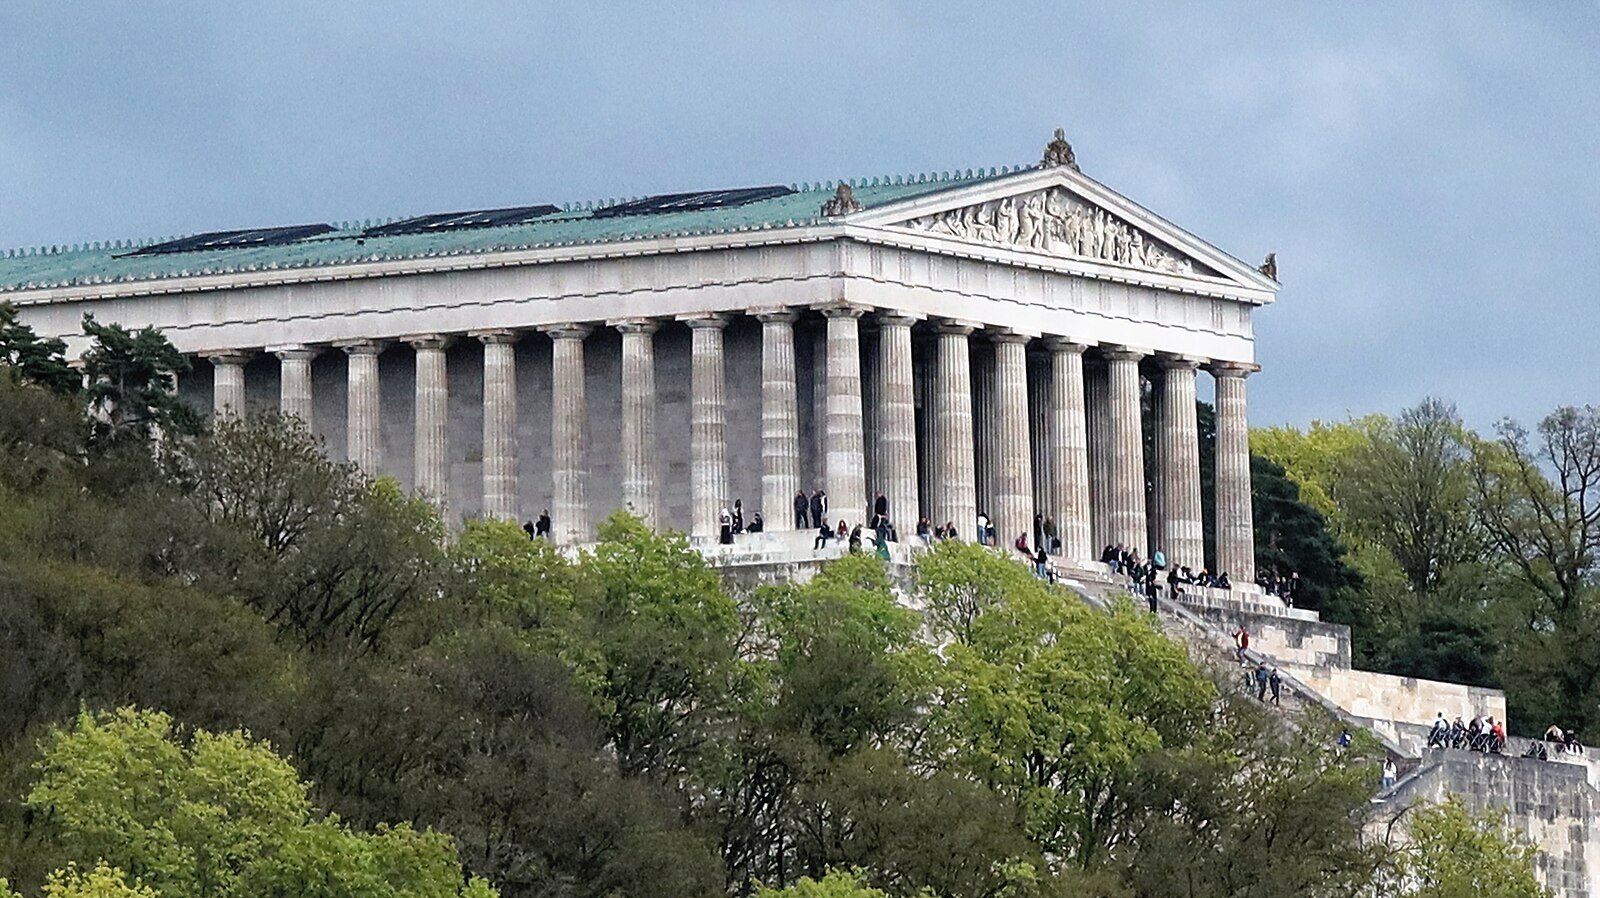 View of Walhalla, German memorial inspired by Acropolis' Parthenon in Athens, Greece